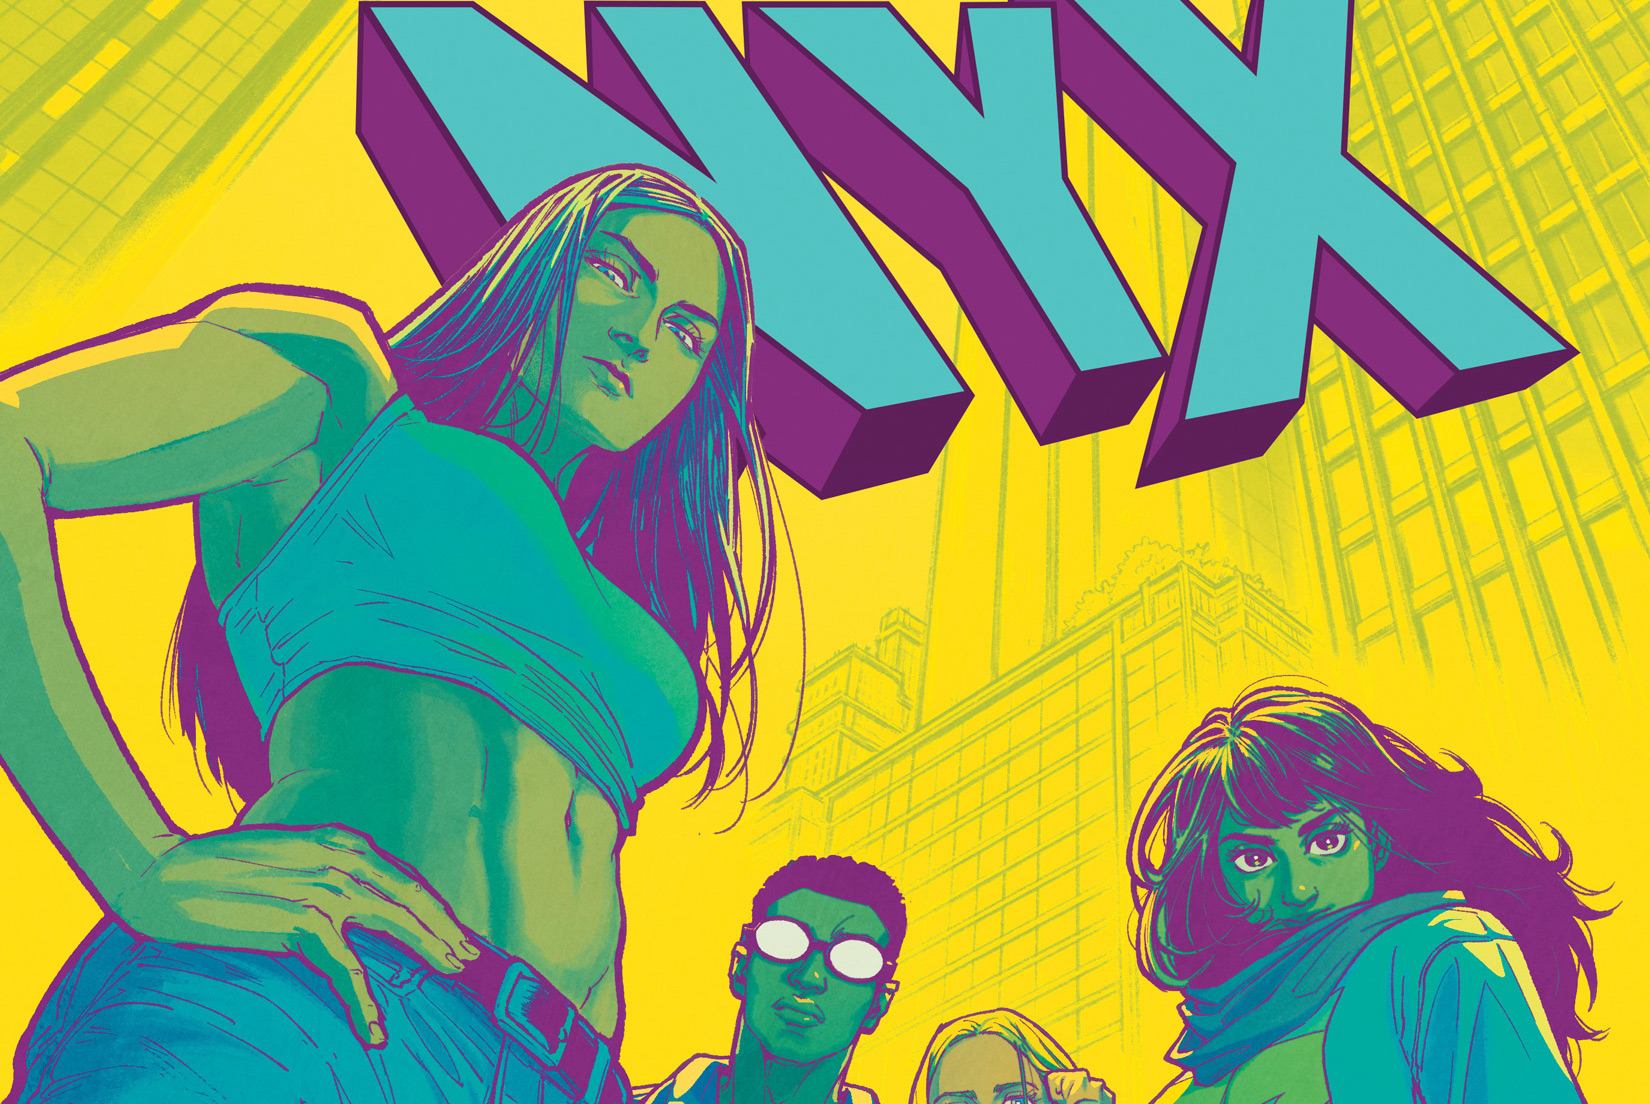 Get hype, check out every 'NYX' #1 cover out July 24